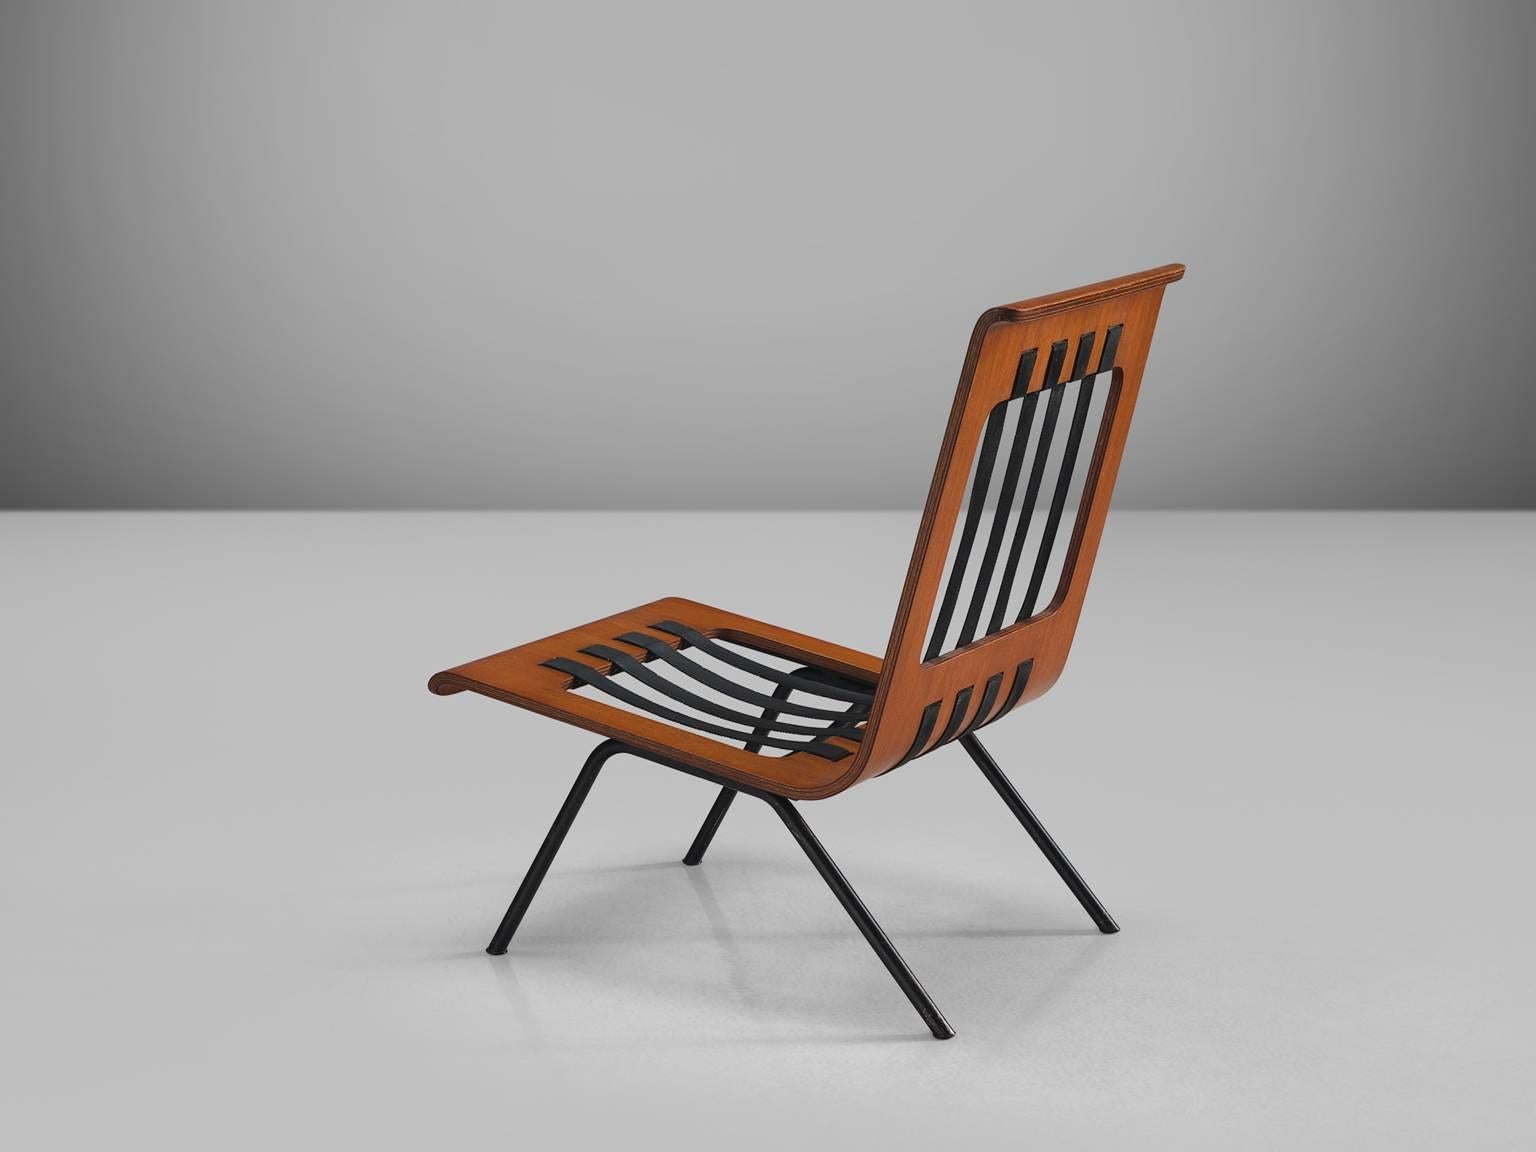 Franco Campo & Carlo Graffi lounge chair, teak, metal, fabric, Italy, circa 1960.

This midcentury Italian easy chair is designed by Franco Campo and Carlo Graffi. The curved teak seat features black elastic bands on both seat and back. The shell